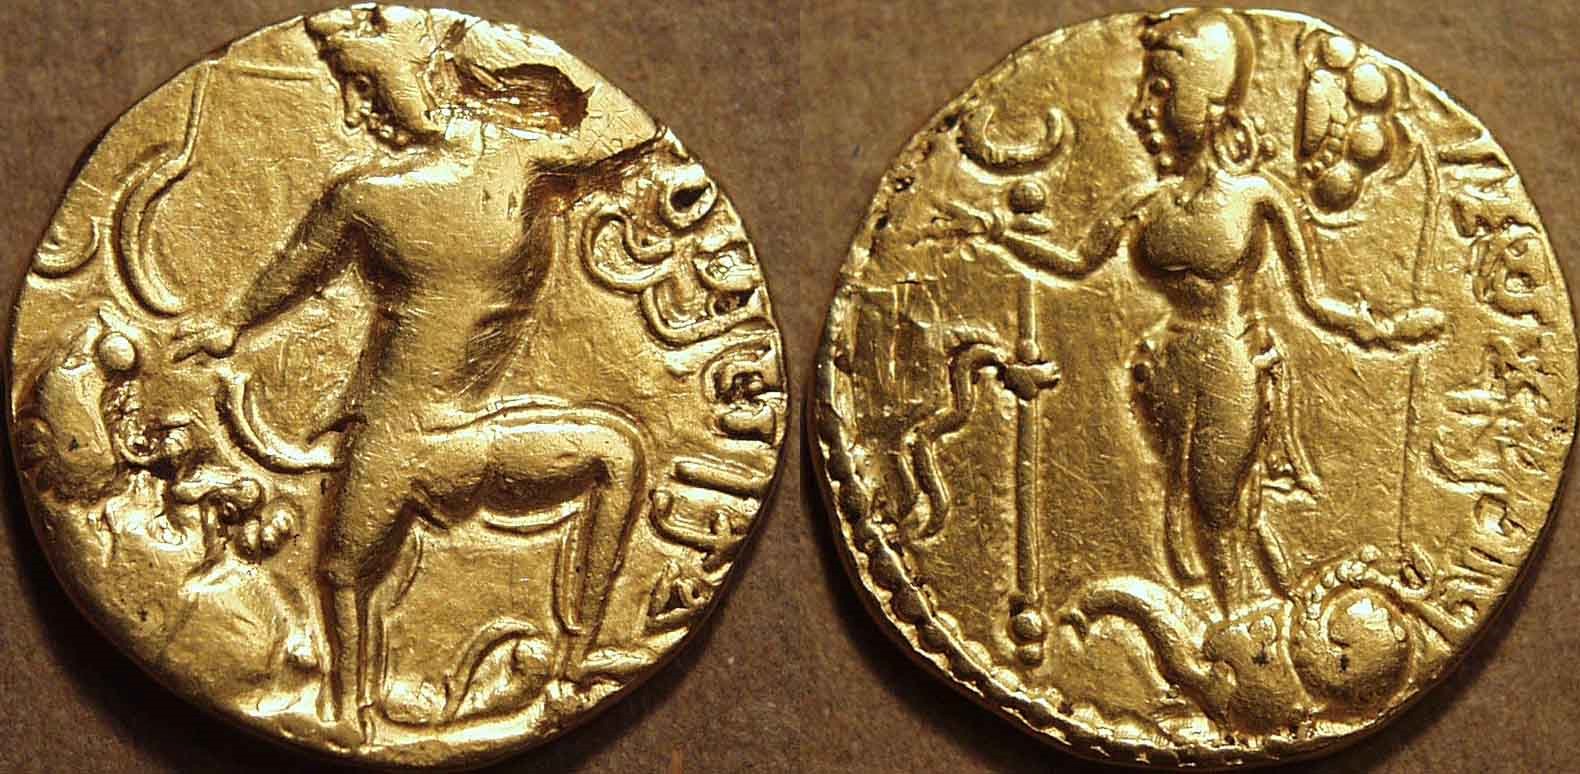 Tiger Slaying Design On Ancient Coin